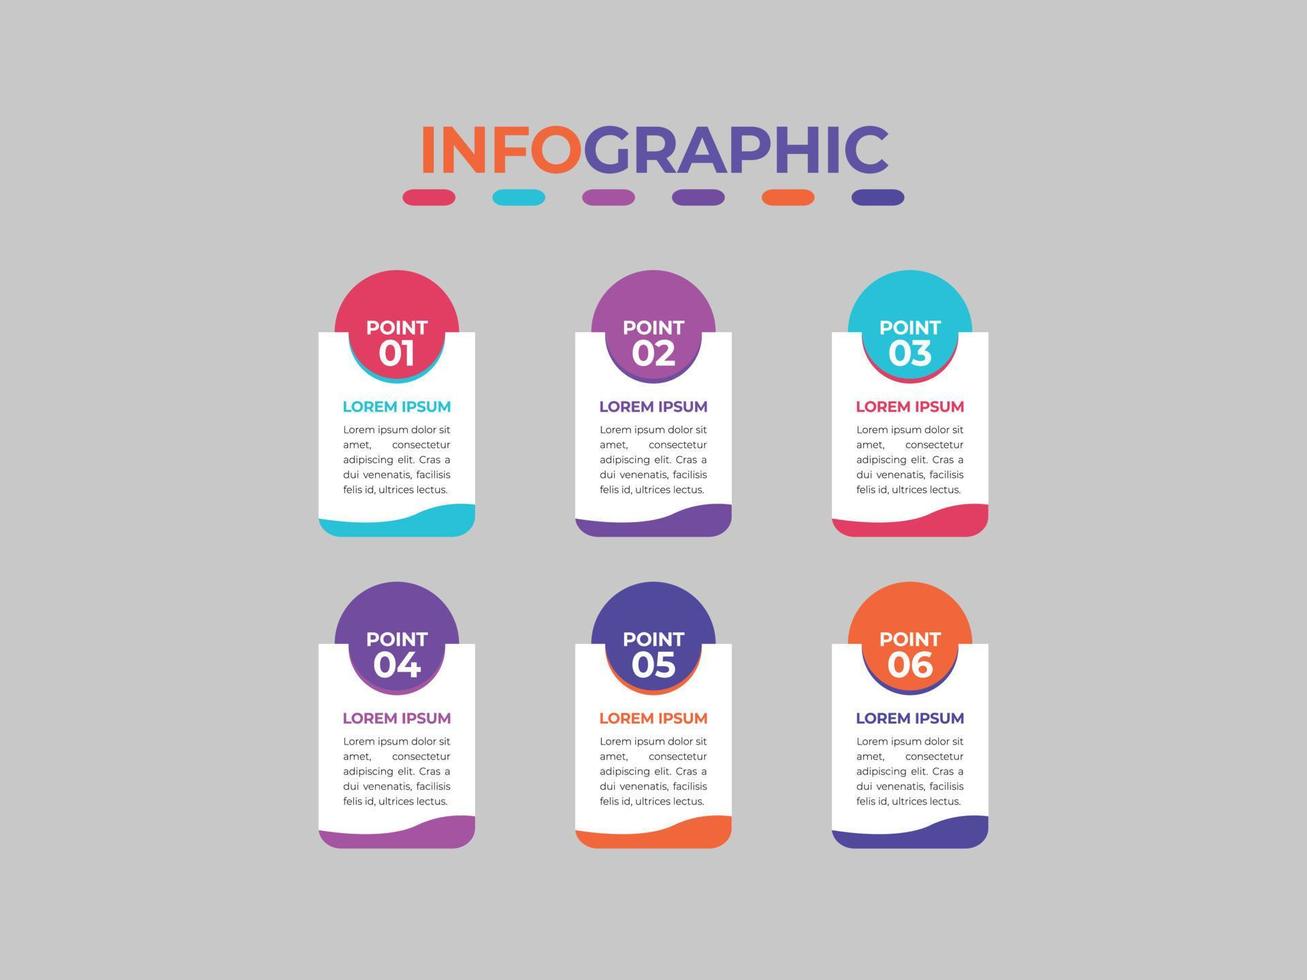 Vector Infographic Banner Template Design